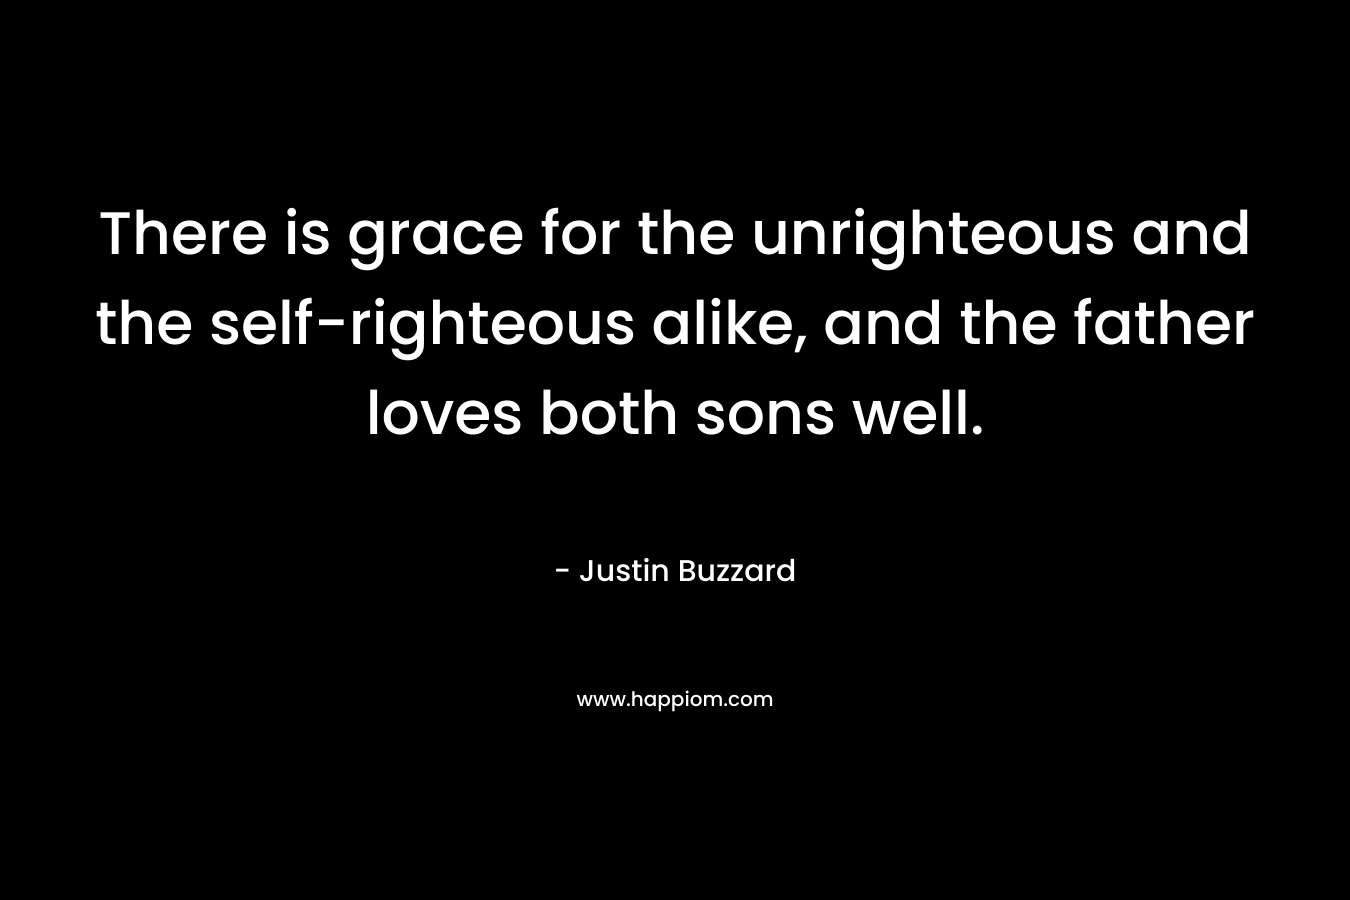 There is grace for the unrighteous and the self-righteous alike, and the father loves both sons well.